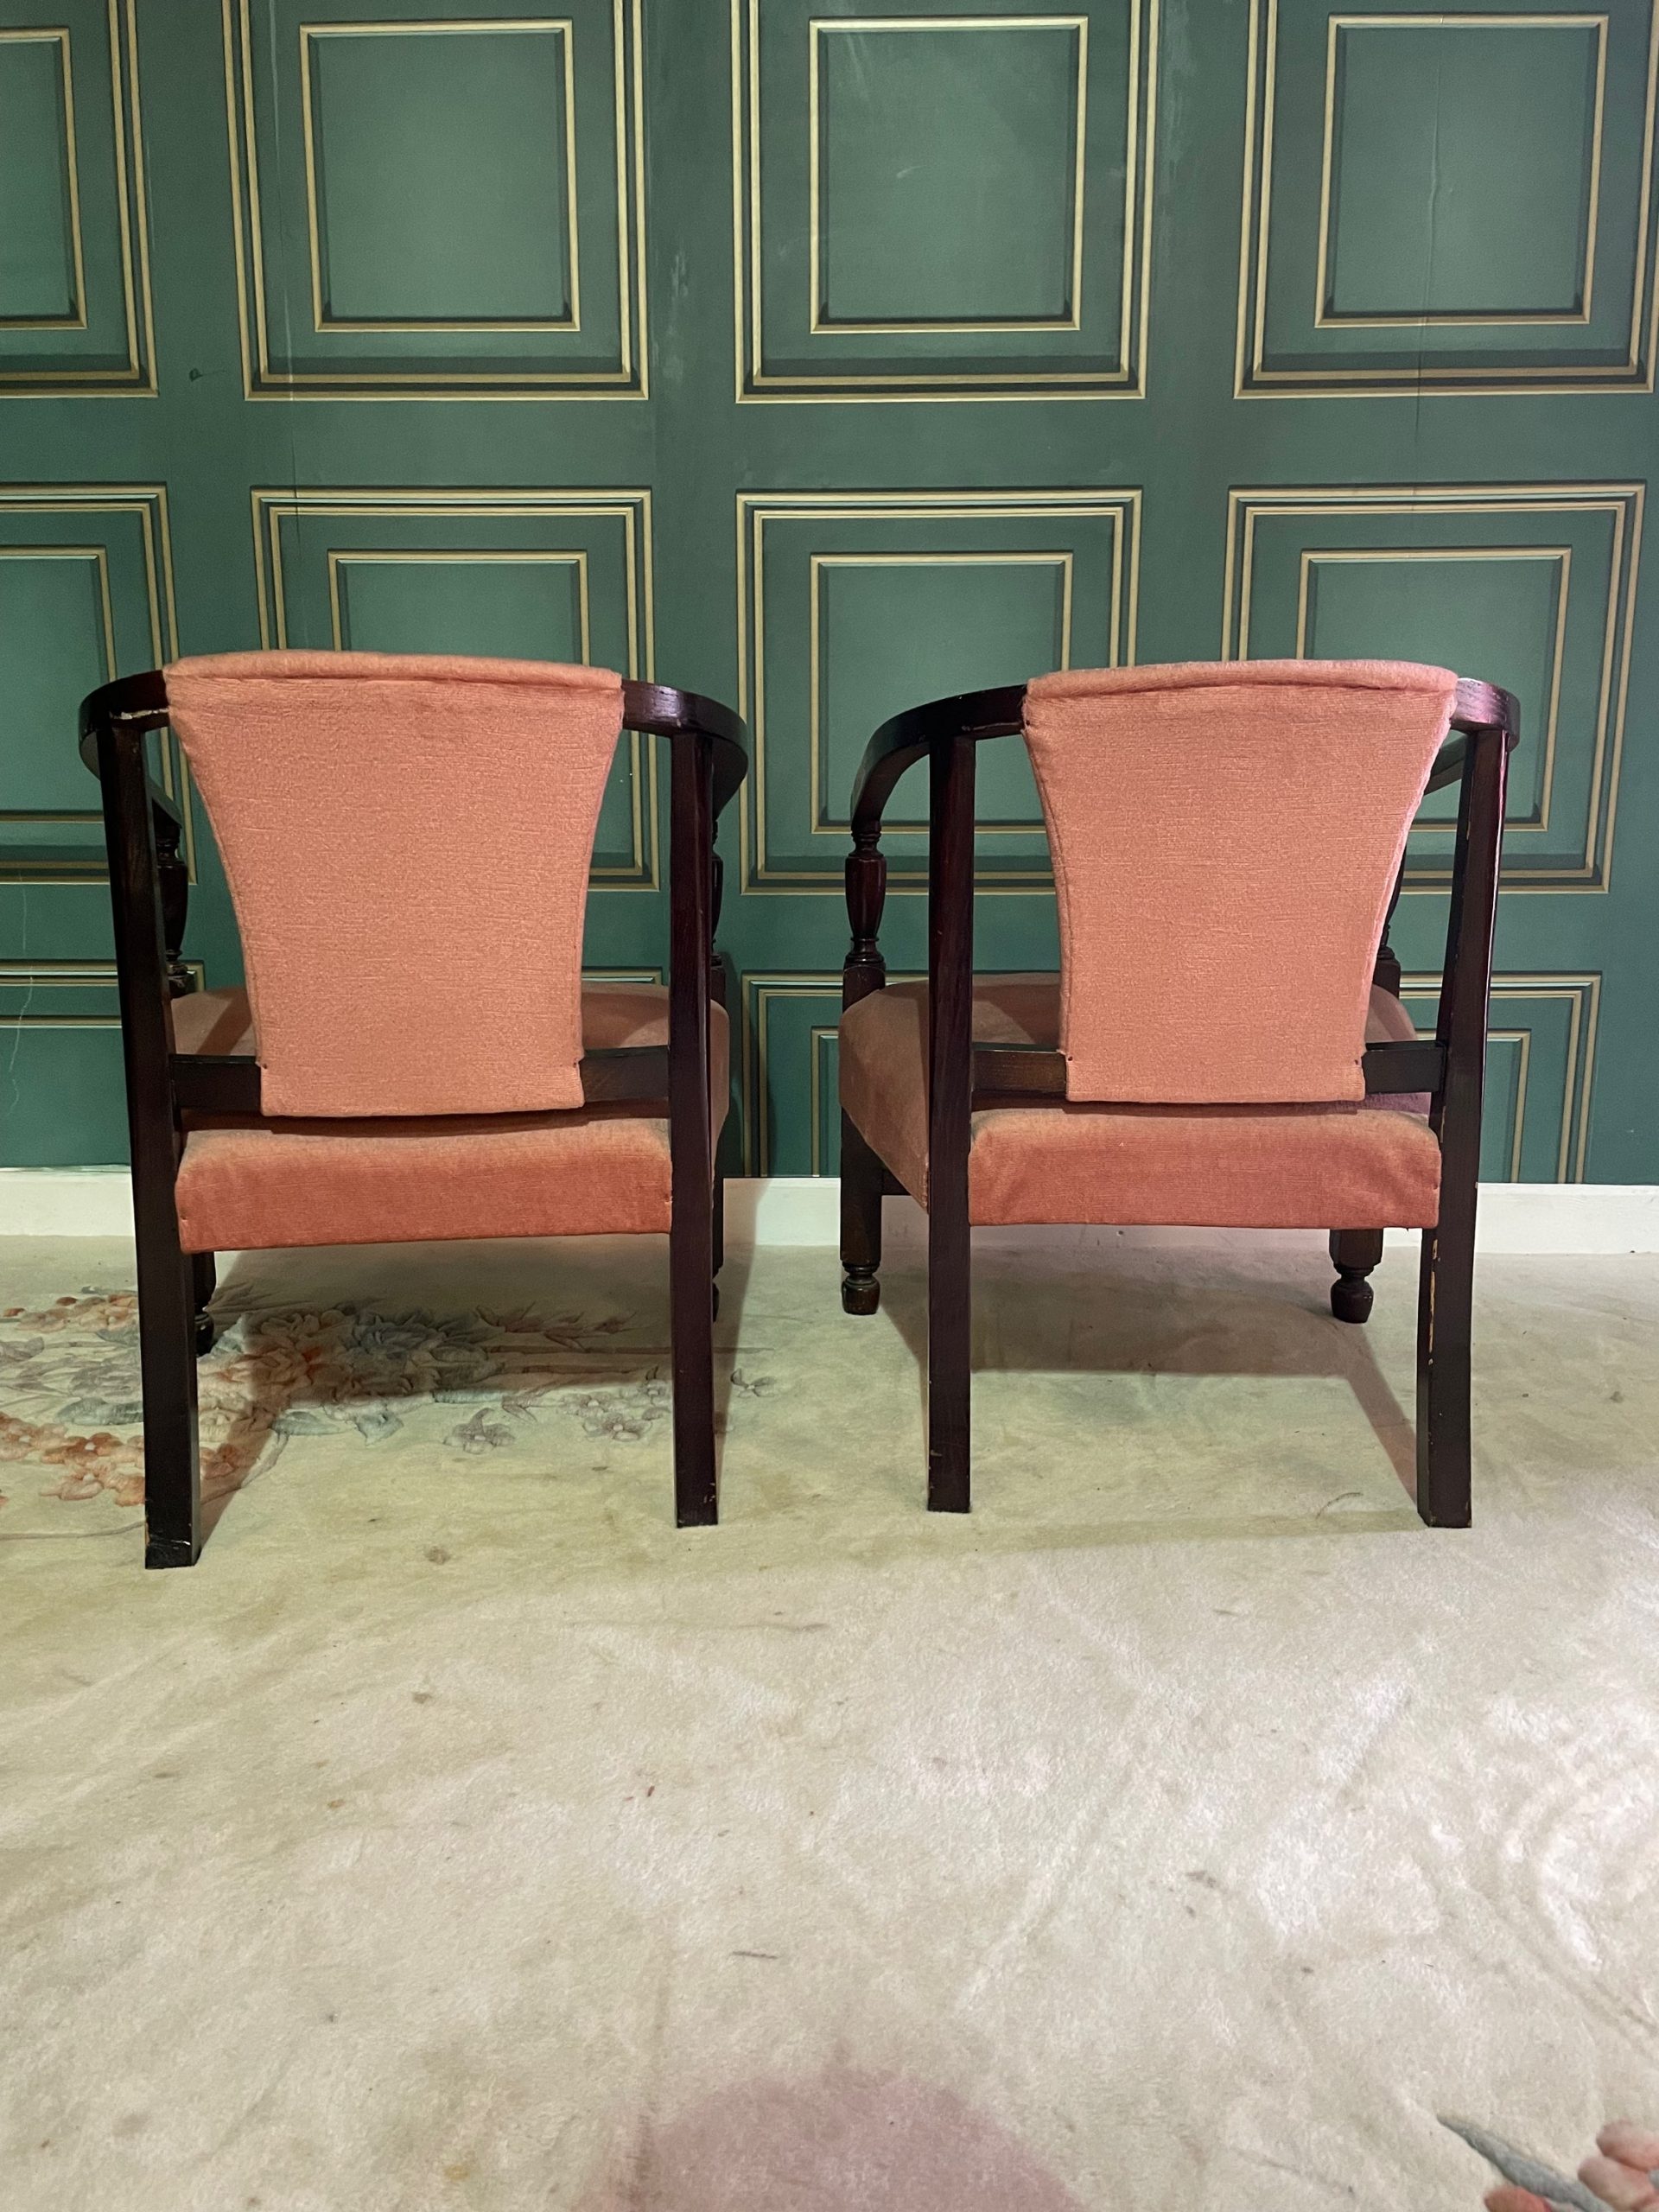 Pair of Vintage tub chairs upholstered in a dusky rose fabric - Hunt Vintage